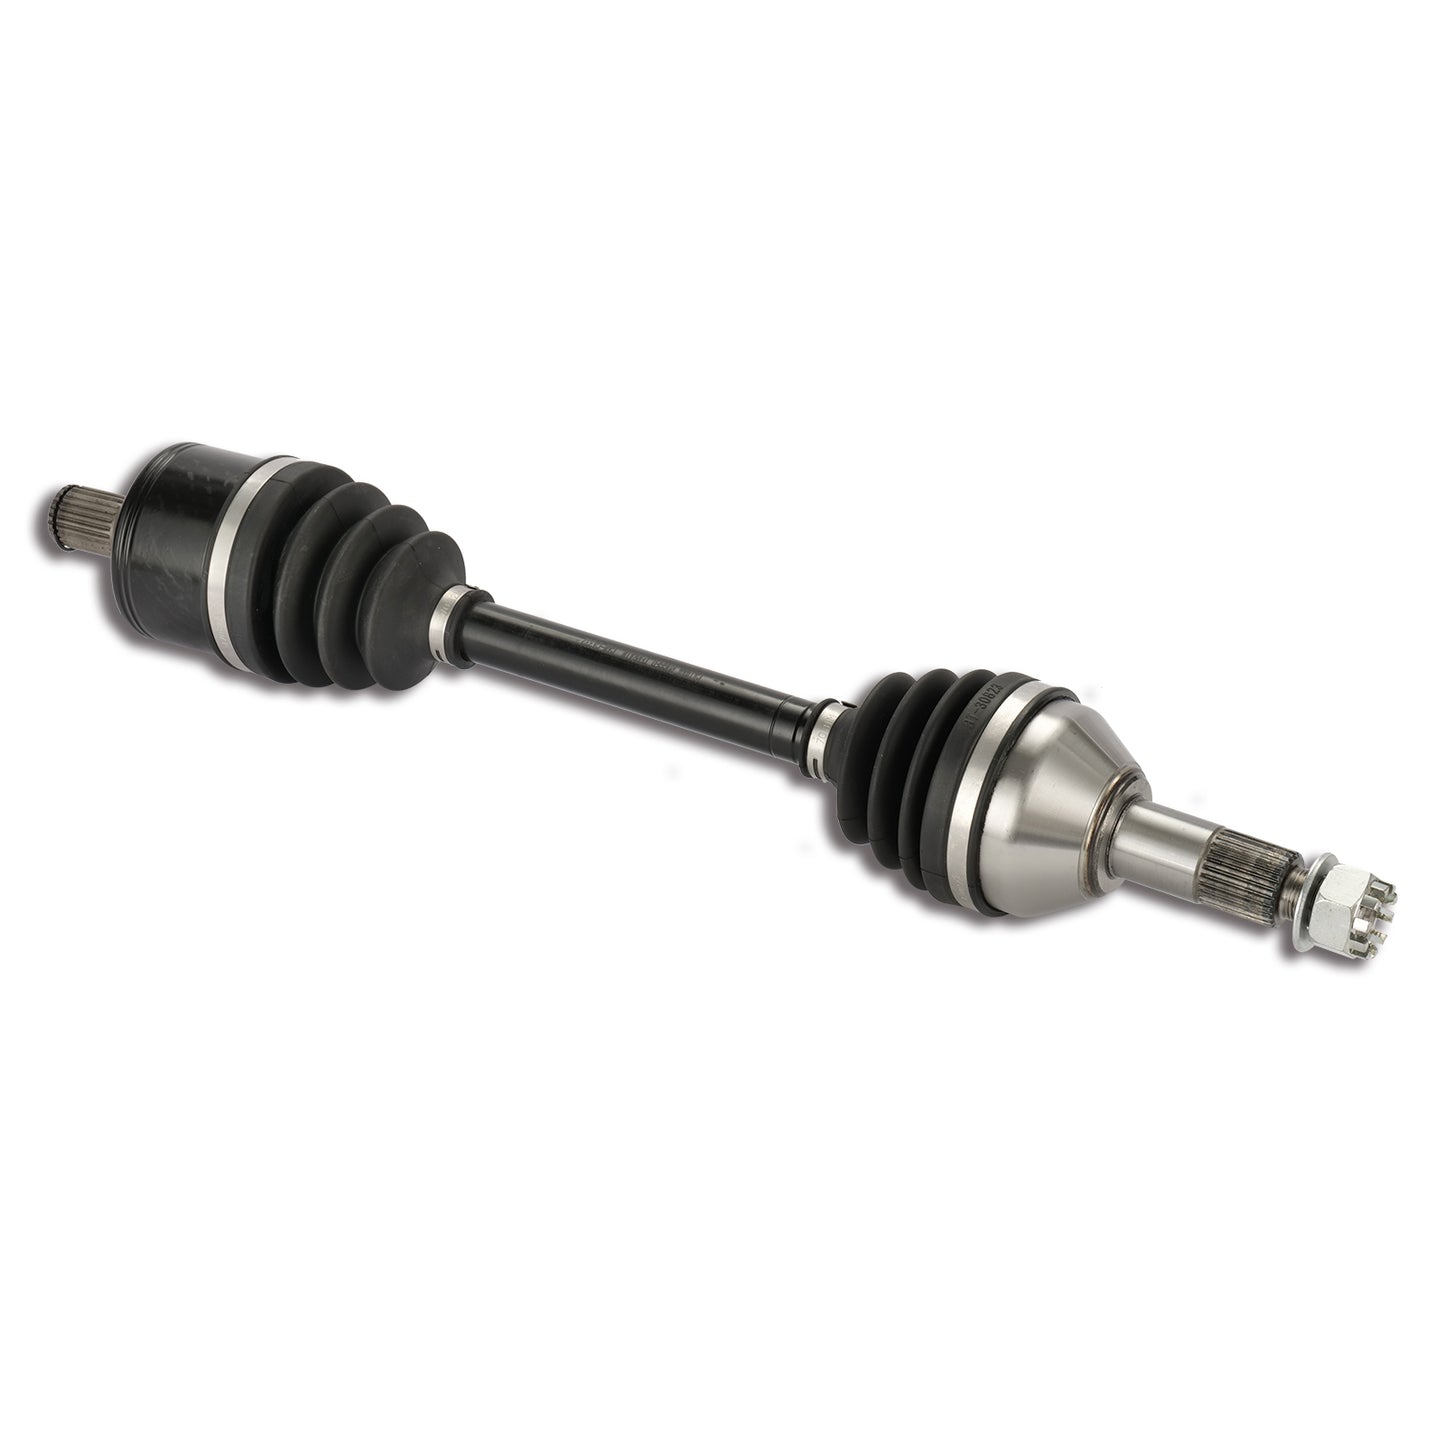 CAM-CA332 Rear Left Drive Shaft CV Axle Compatible with CAN AM (2019-2021) Maverick Trail 800, 1000 BR 705502541